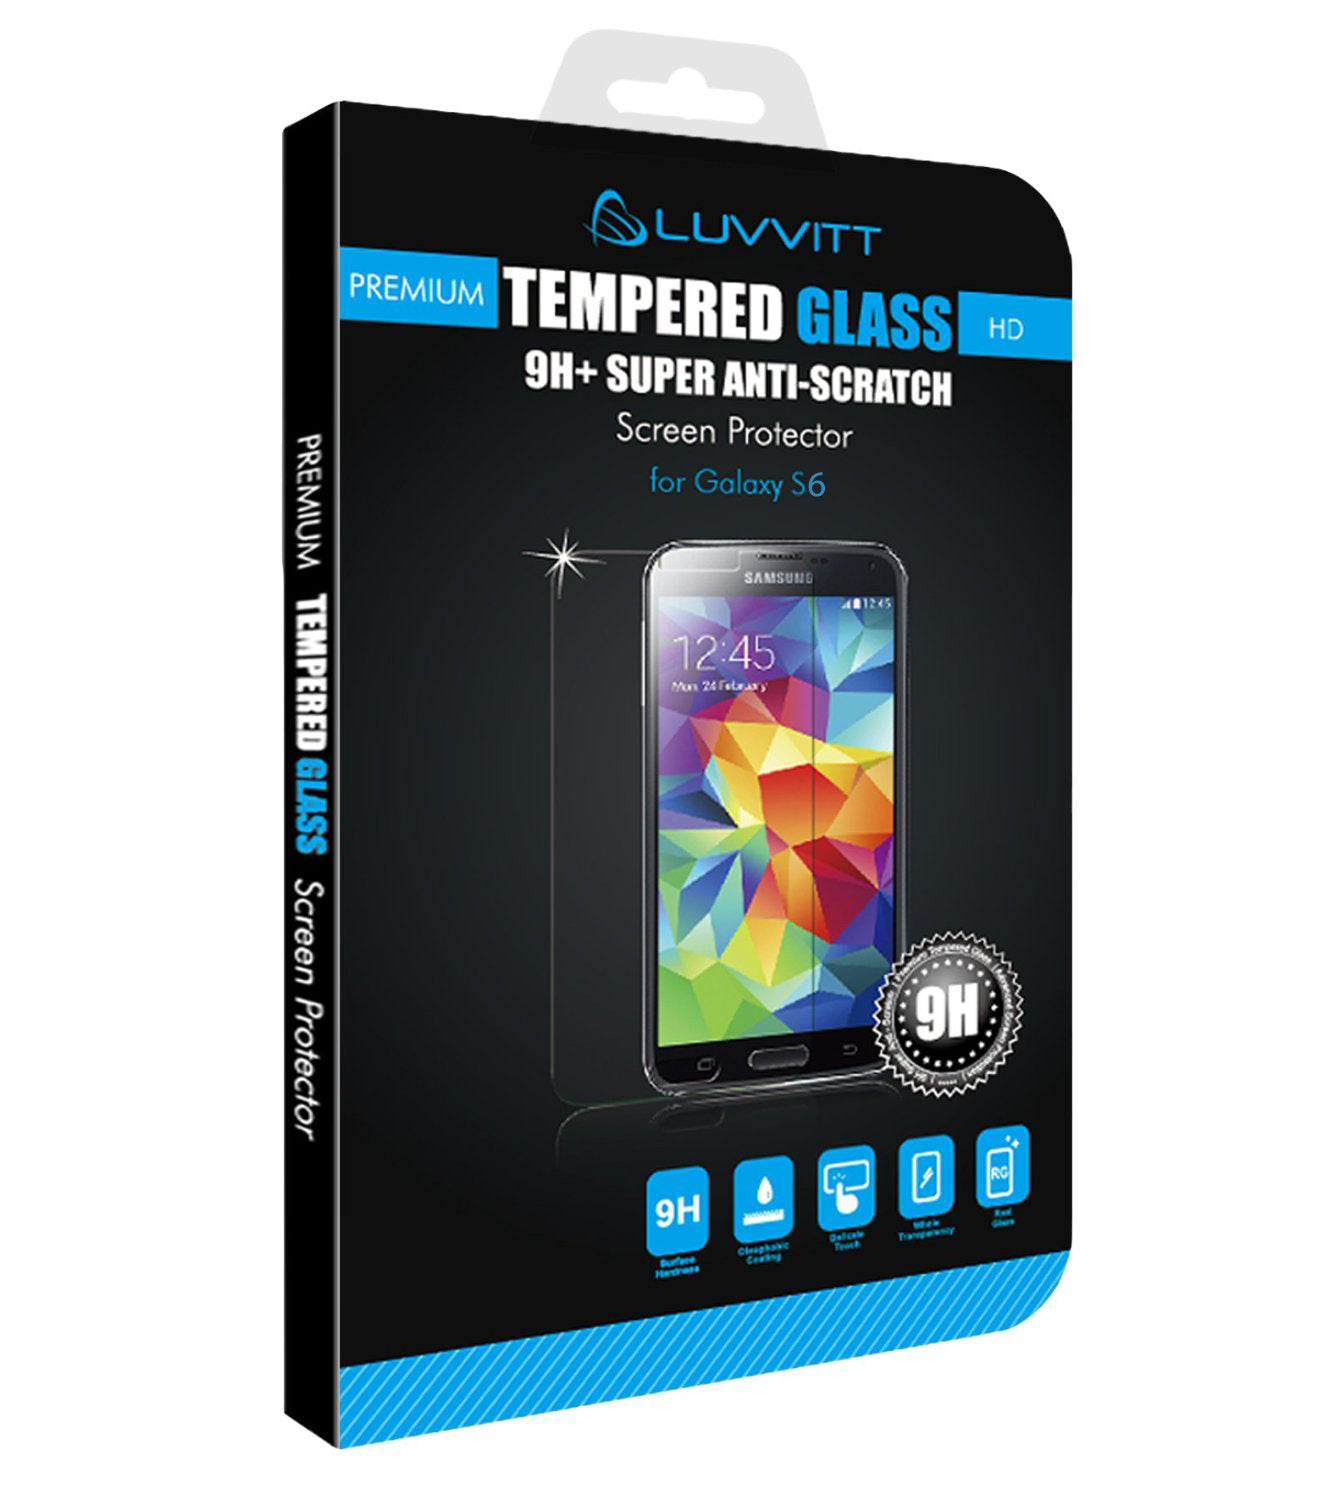 LUVVITT TEMPERED GLASS Screen Protector for Galaxy S6 - Crystal Clear